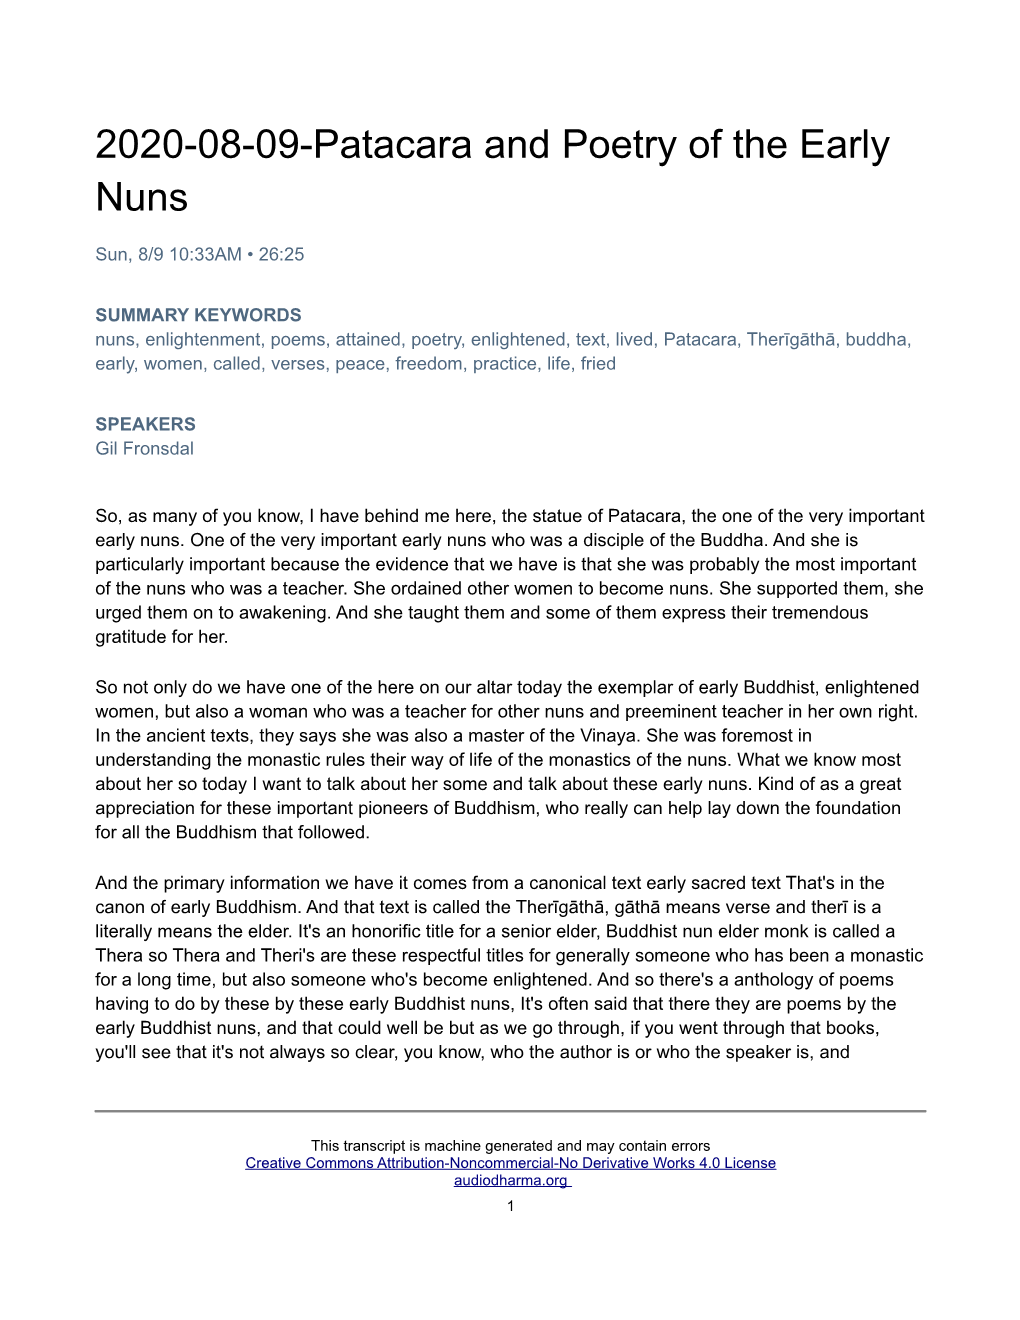 2020-08-09-Patacara and Poetry of the Early Nuns